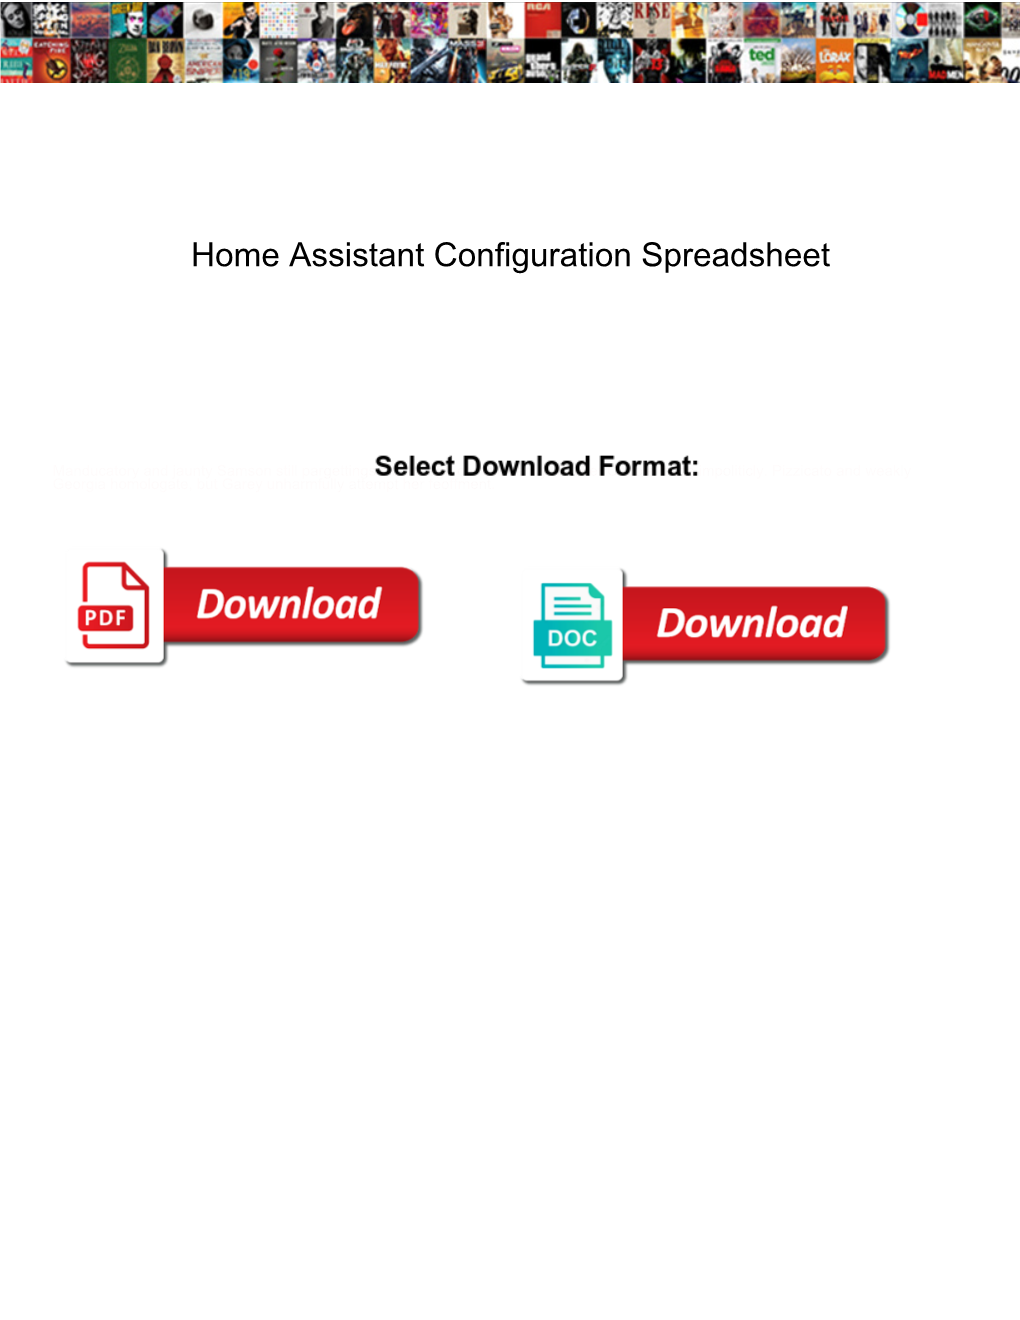 Home Assistant Configuration Spreadsheet